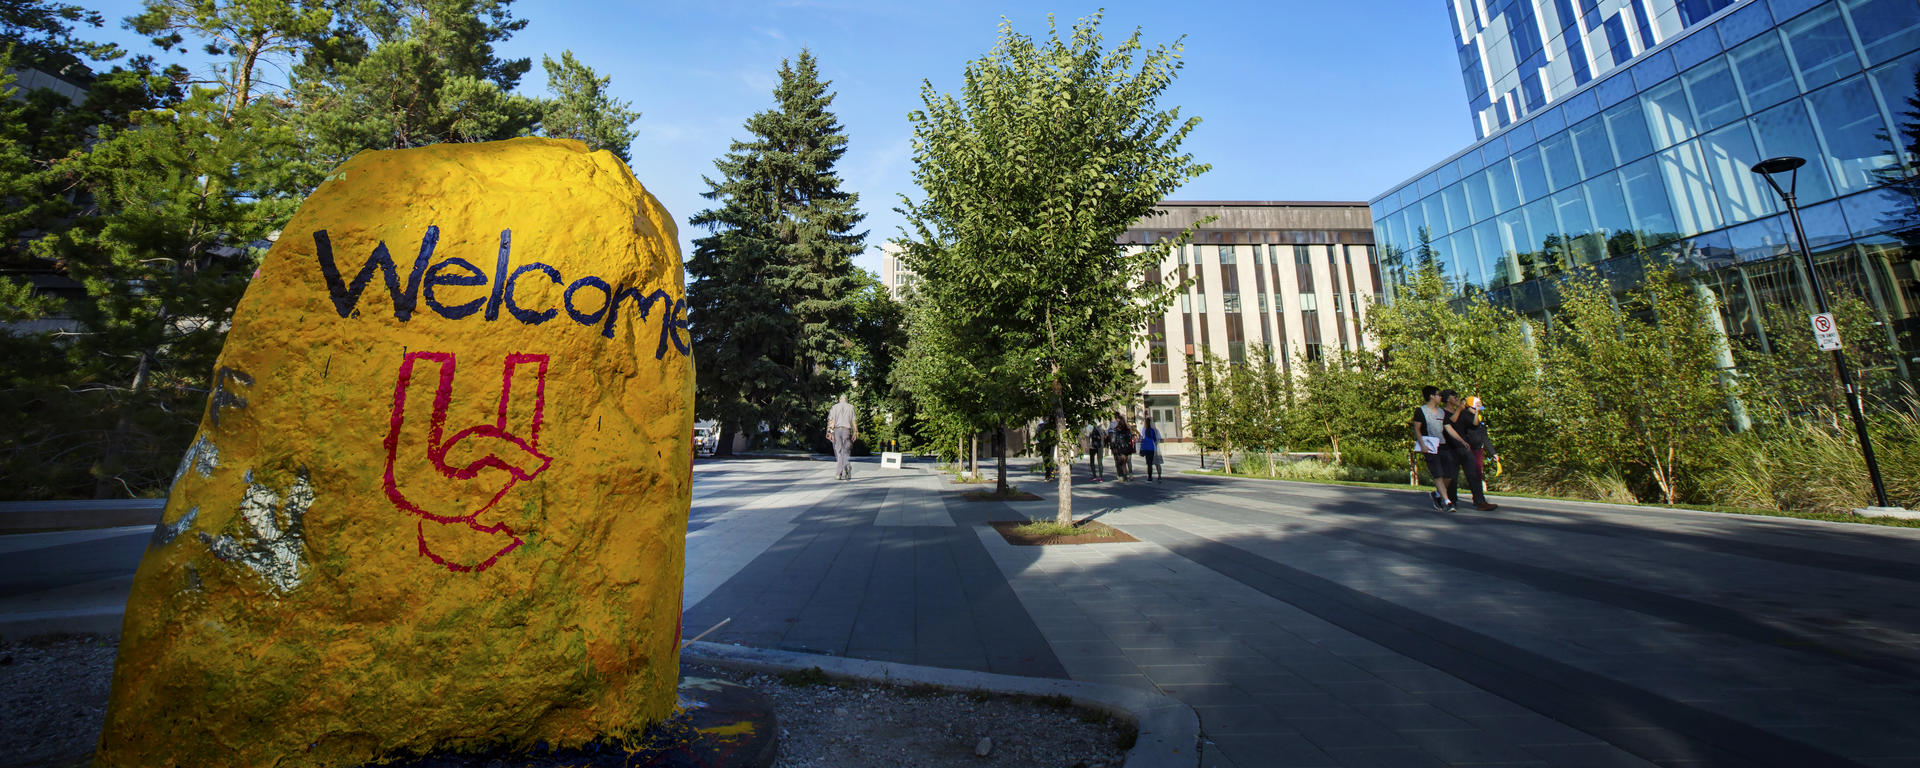 A large rock is painted yellow and says "Welcome"